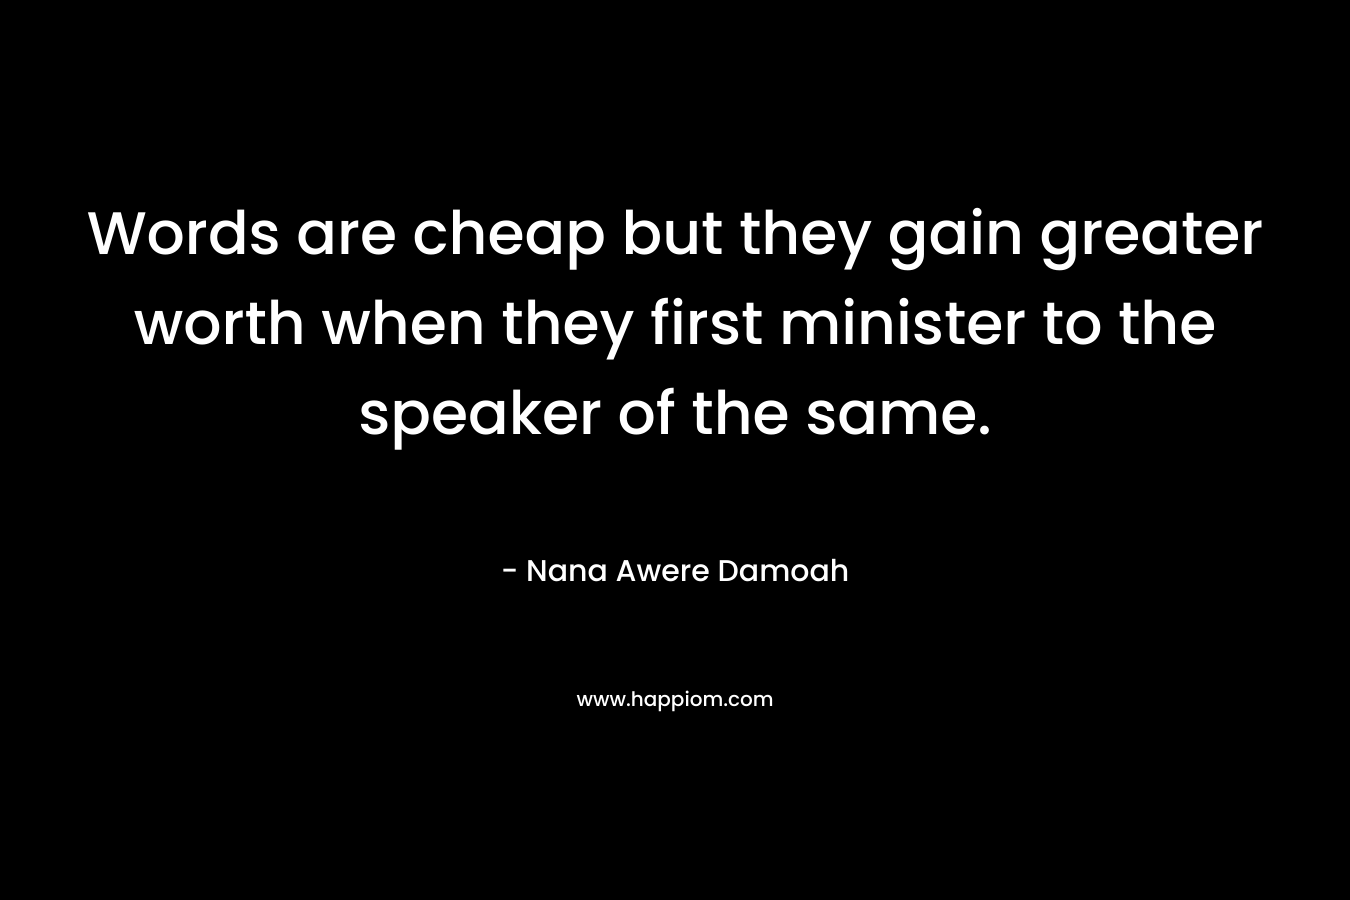 Words are cheap but they gain greater worth when they first minister to the speaker of the same.